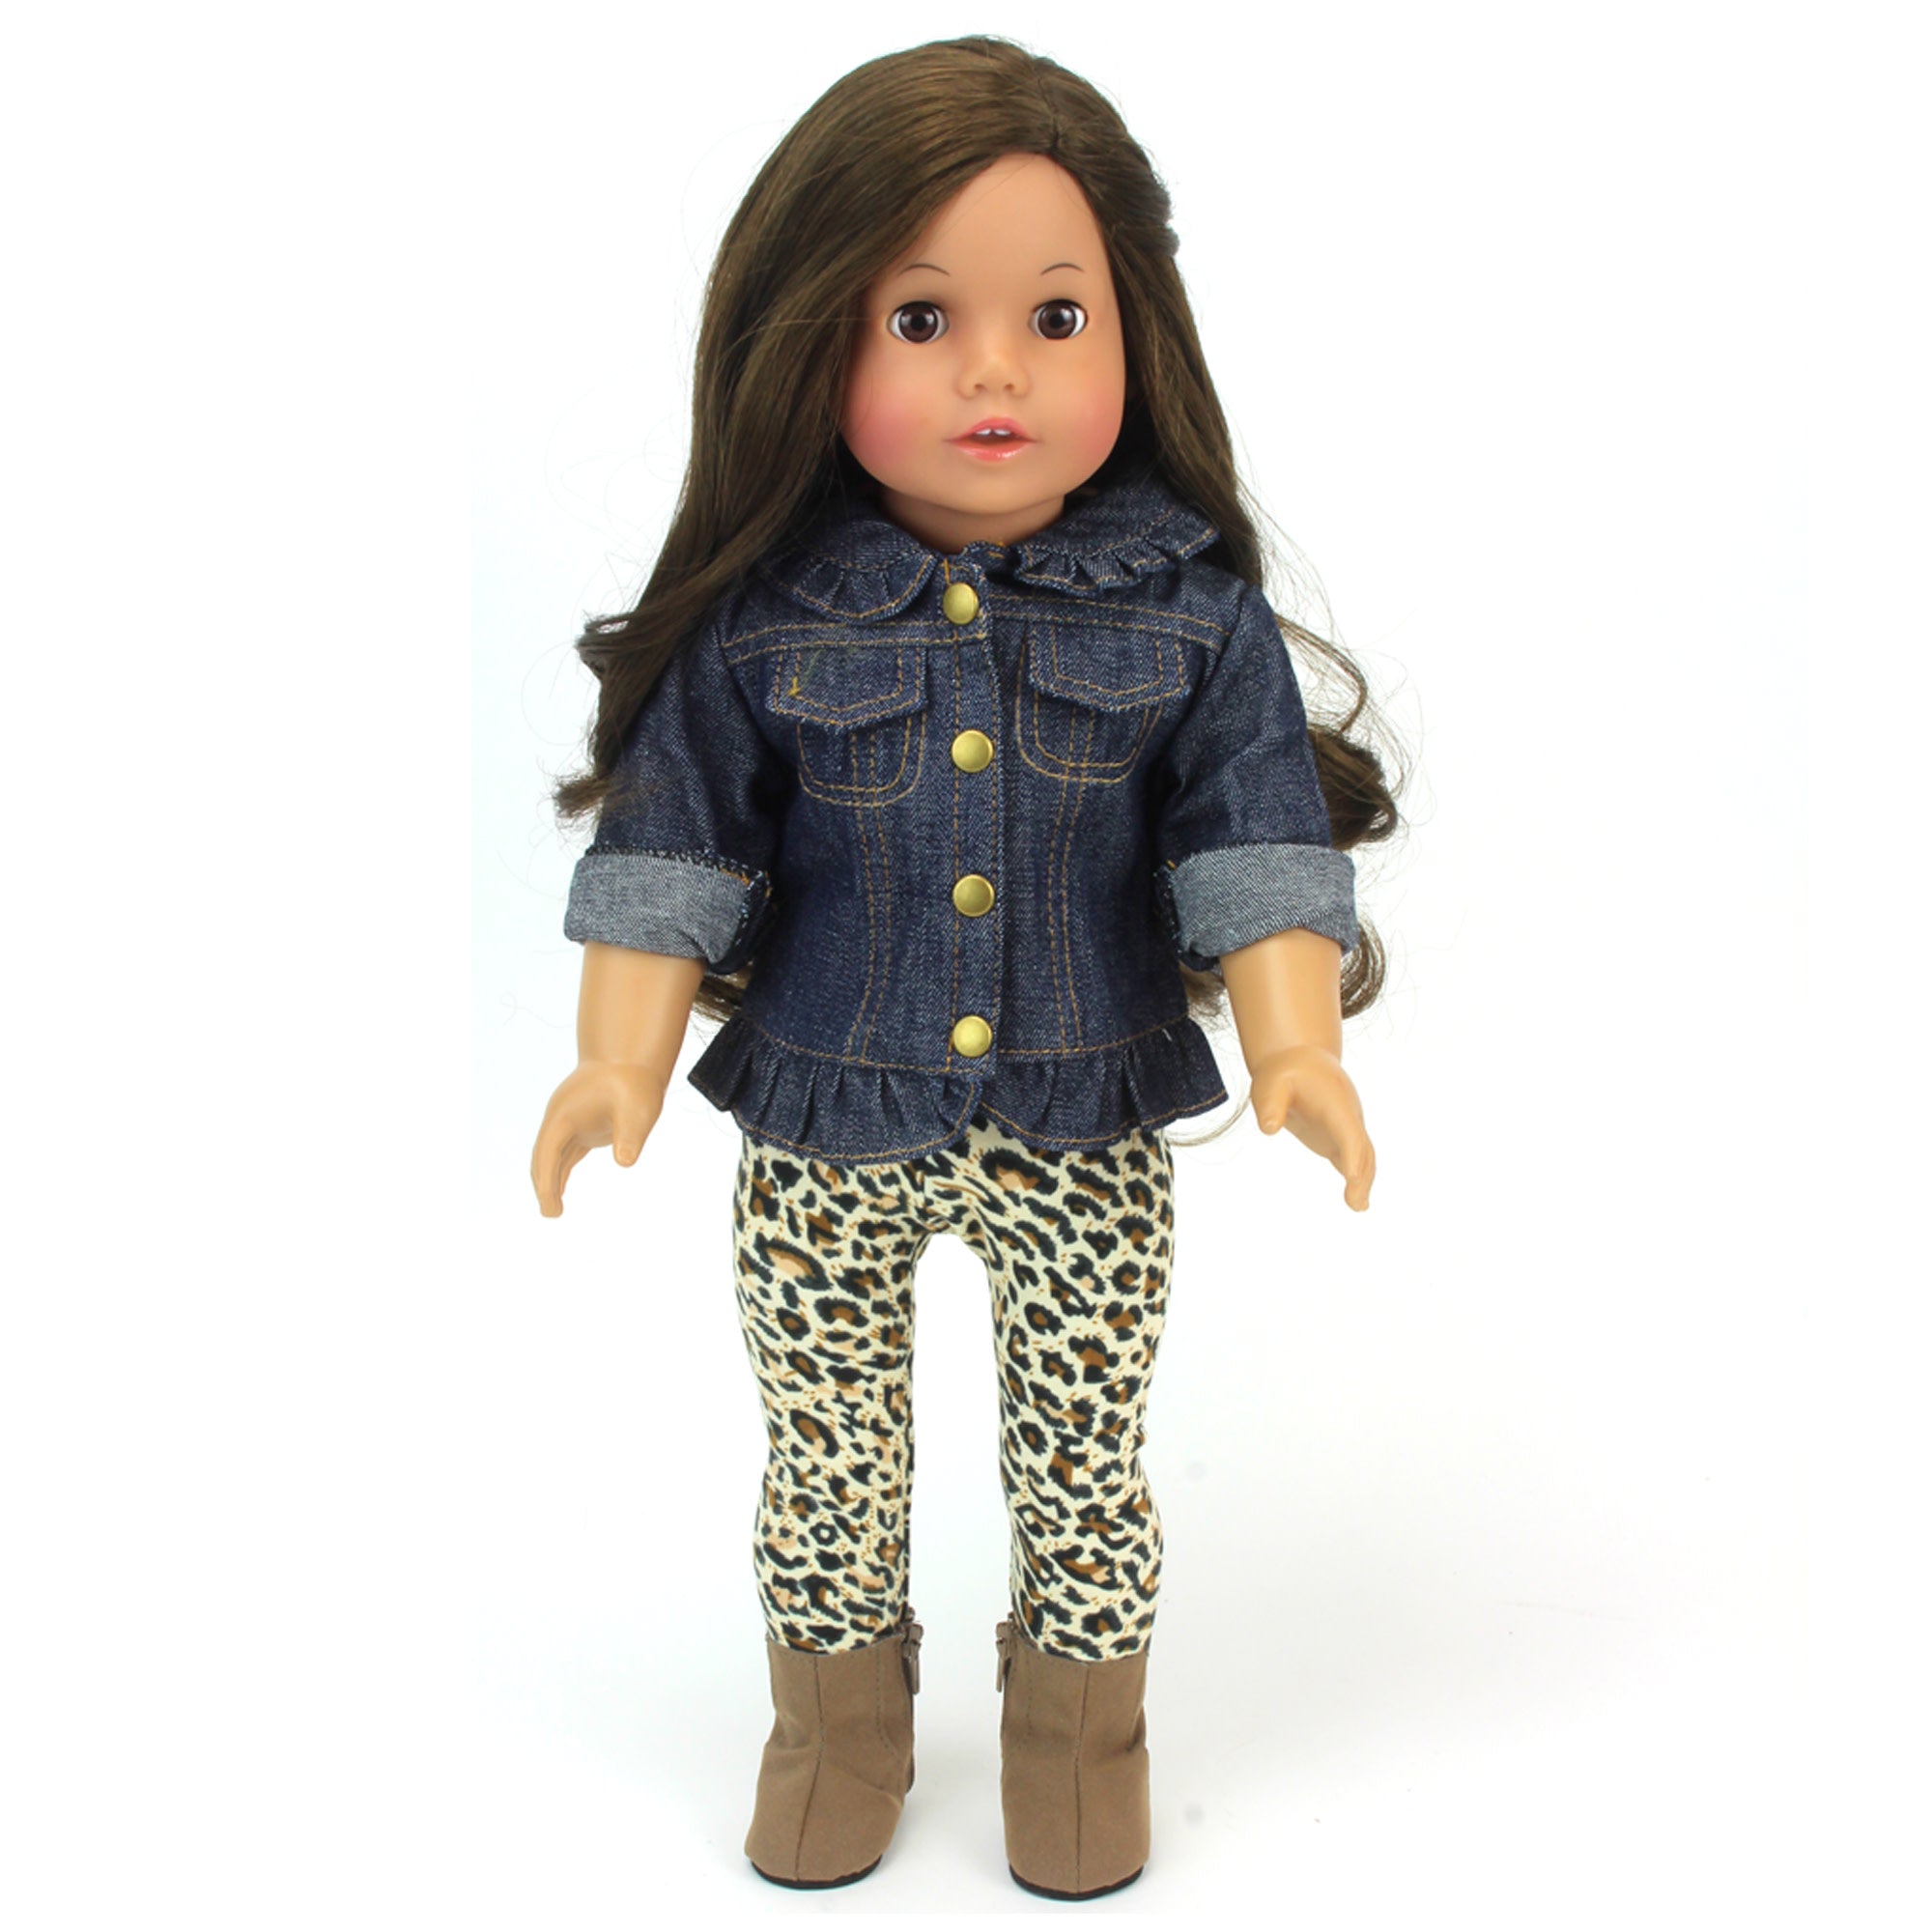 Sophia’s Jean Jacket, Leggings, and Boots Set for 18" Dolls